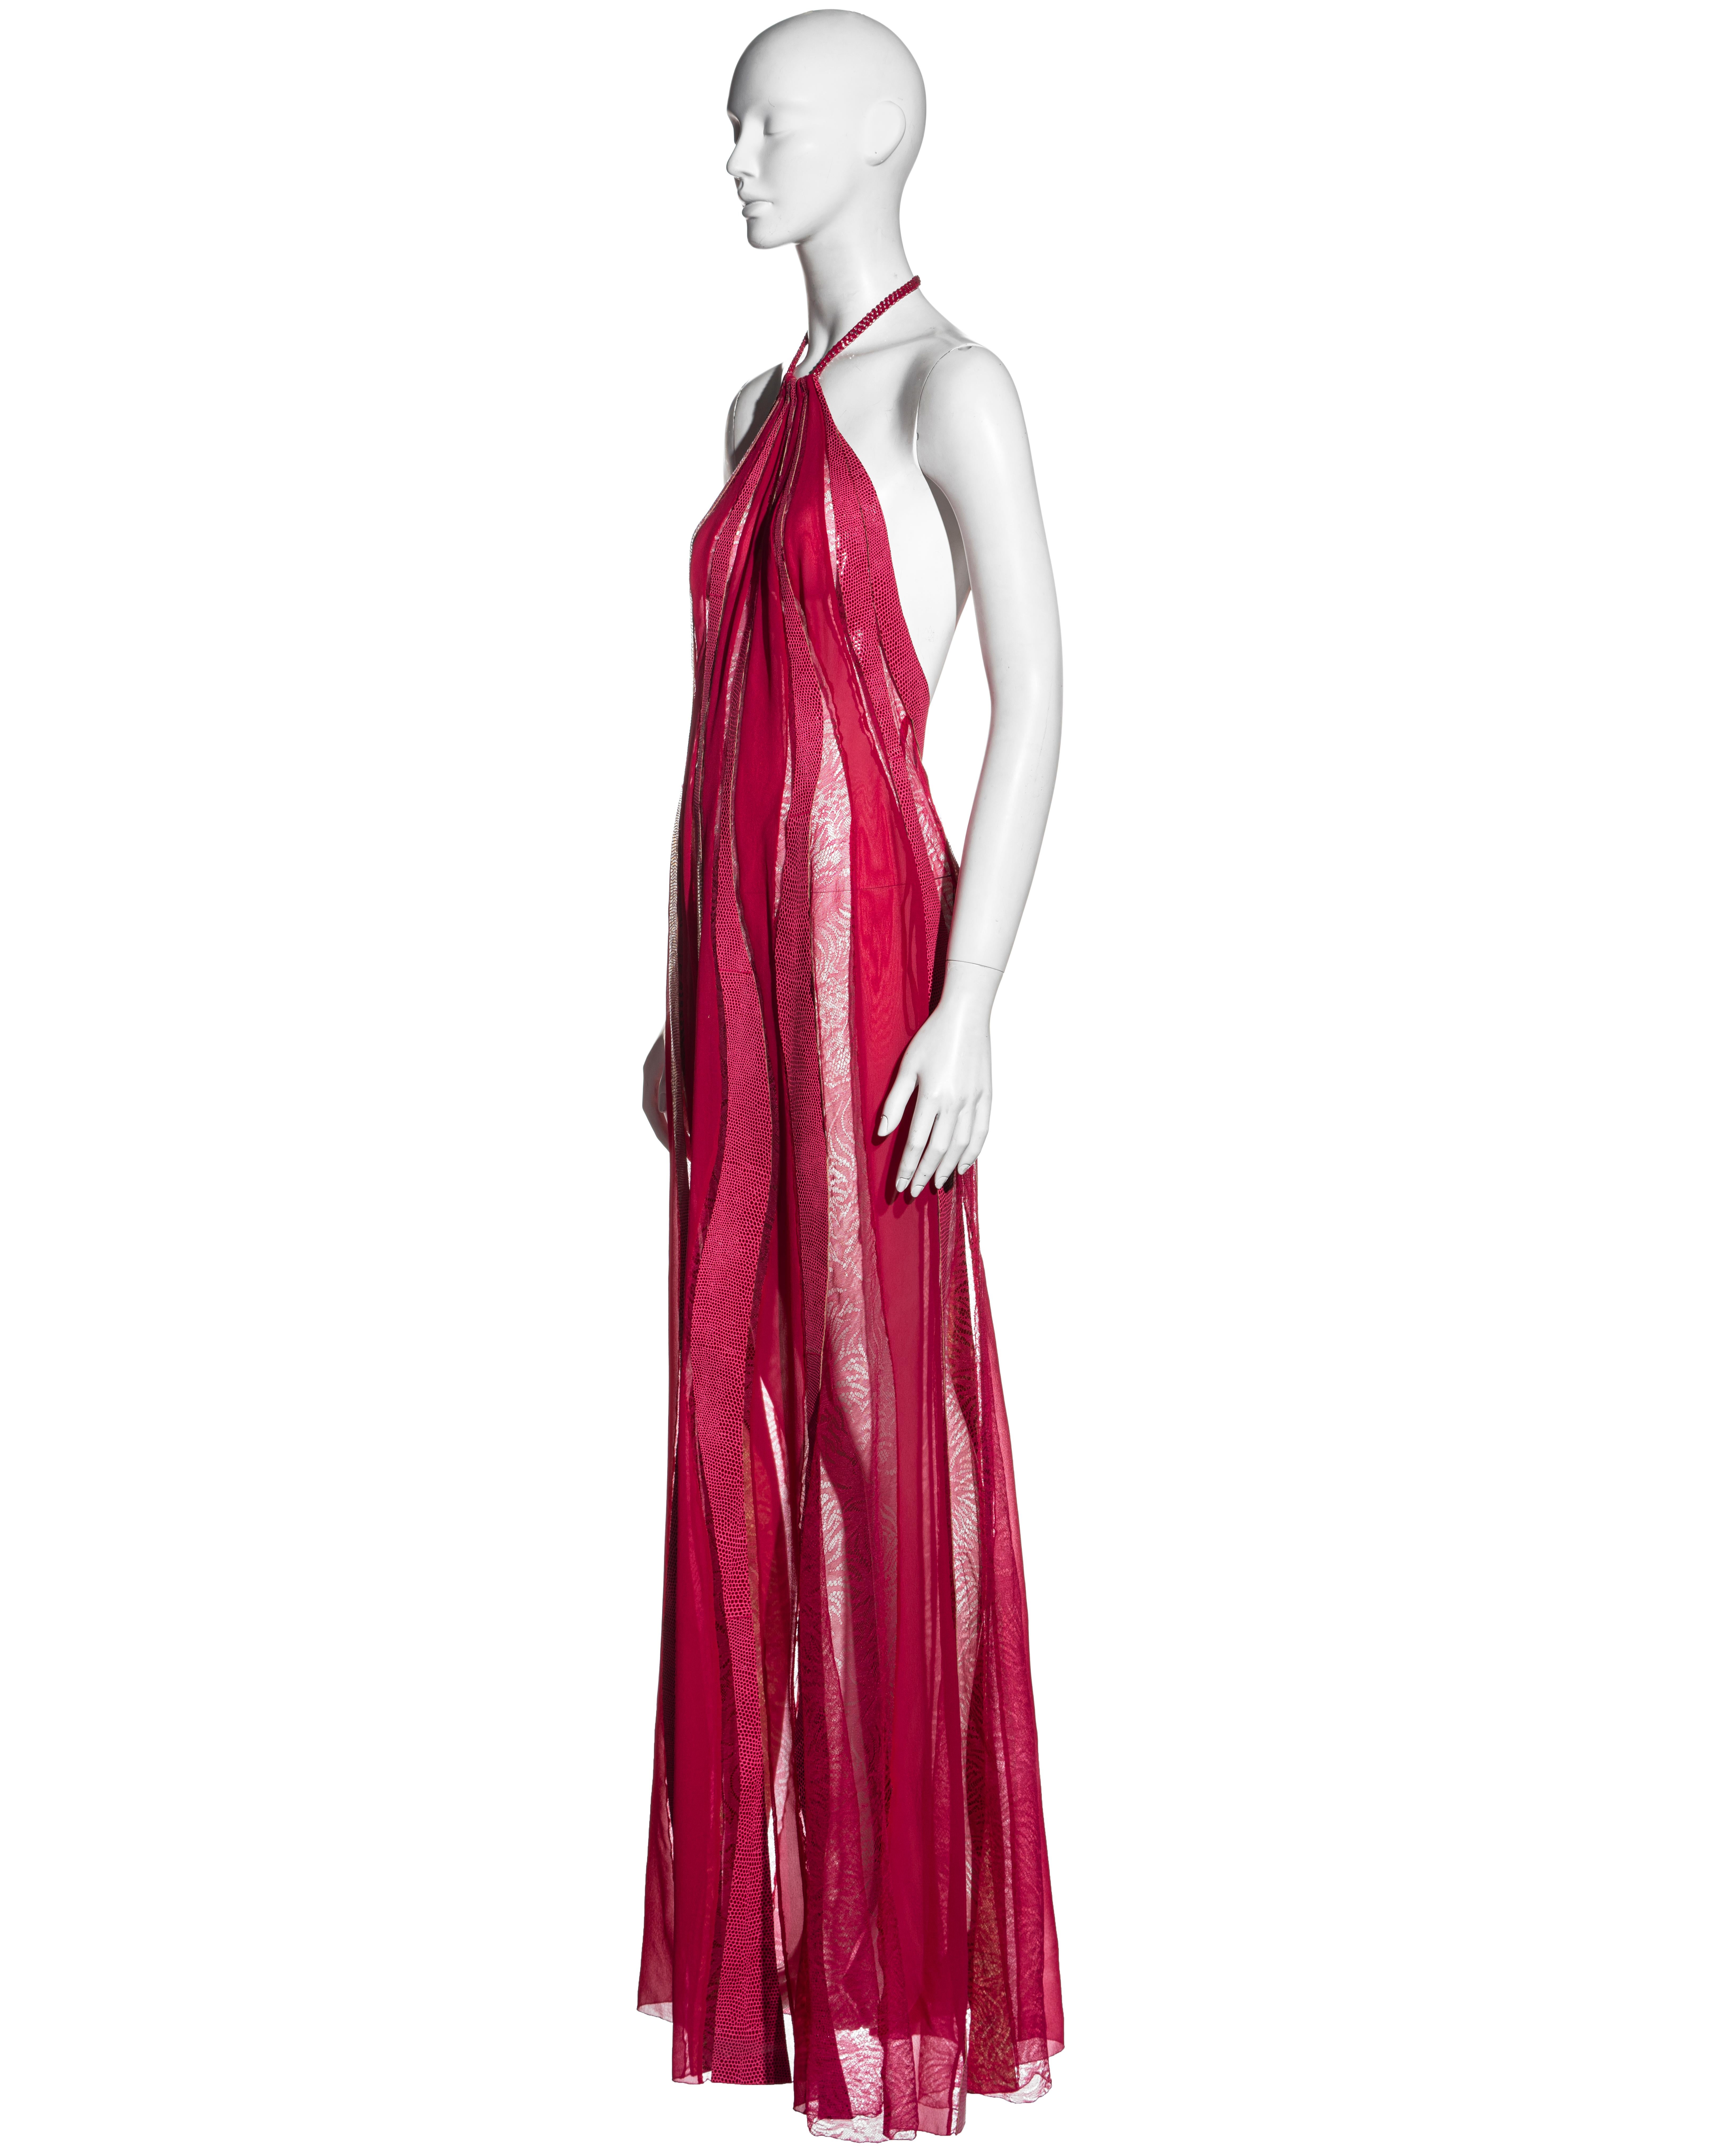 Gianni Versace pink silk, leather and lace halter neck maxi dress, fw 2000 For Sale 1